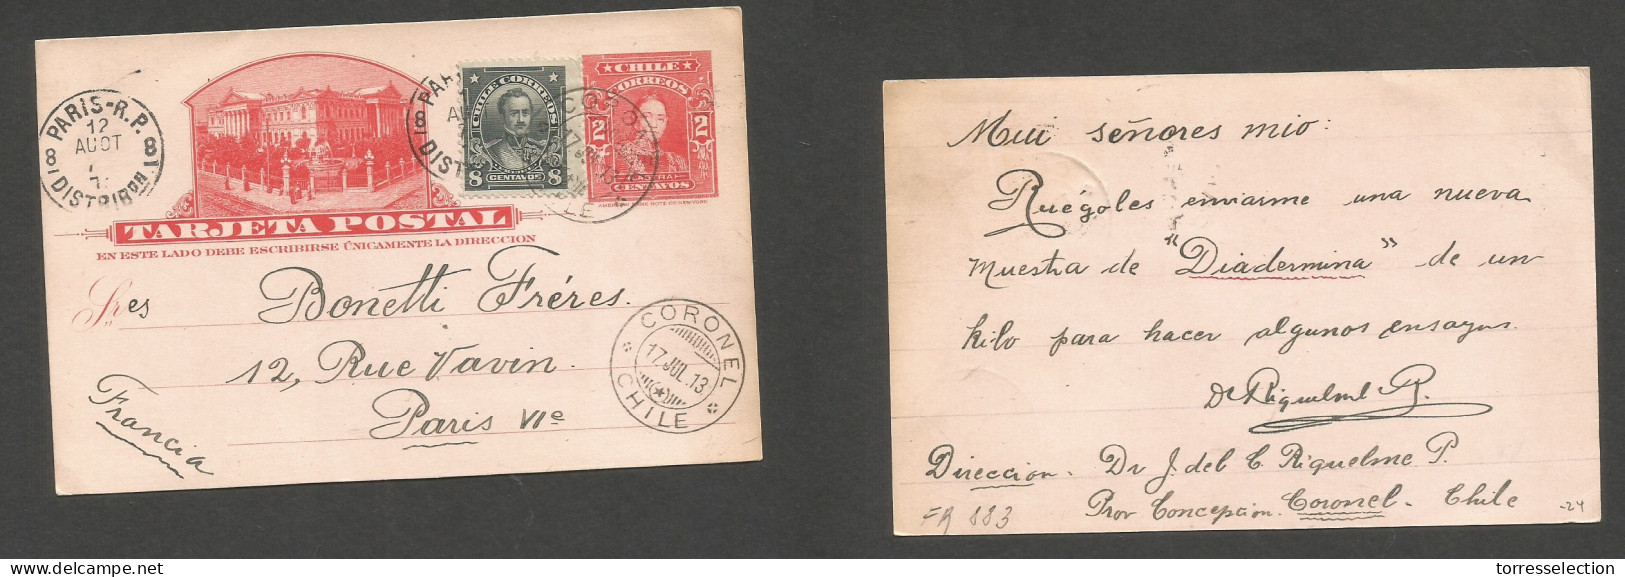 CHILE - Stationery. 1913 (17 July) Coronel - France, Paris. 2c Red Stat Card + 8c Adtl, Cds. VF Usage. - Chile